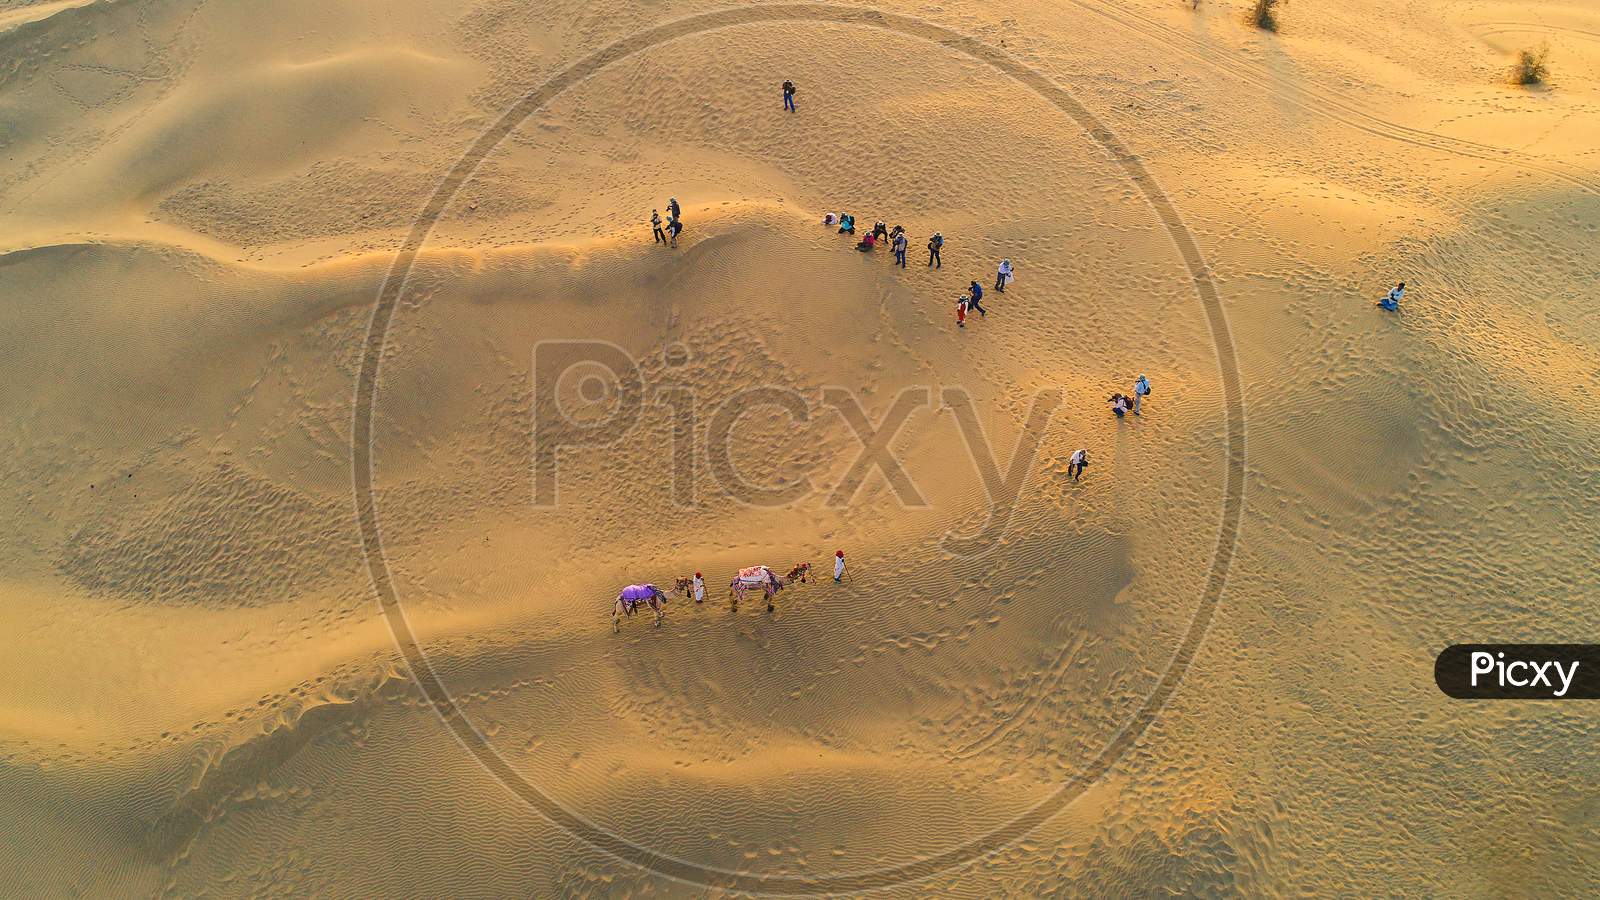 Aerial View Of Jaisalmer Sam Sand Dunes, Tourist Clicking Pictures, Camel, Rajasthan, India, Tourism, Top View Background - Image